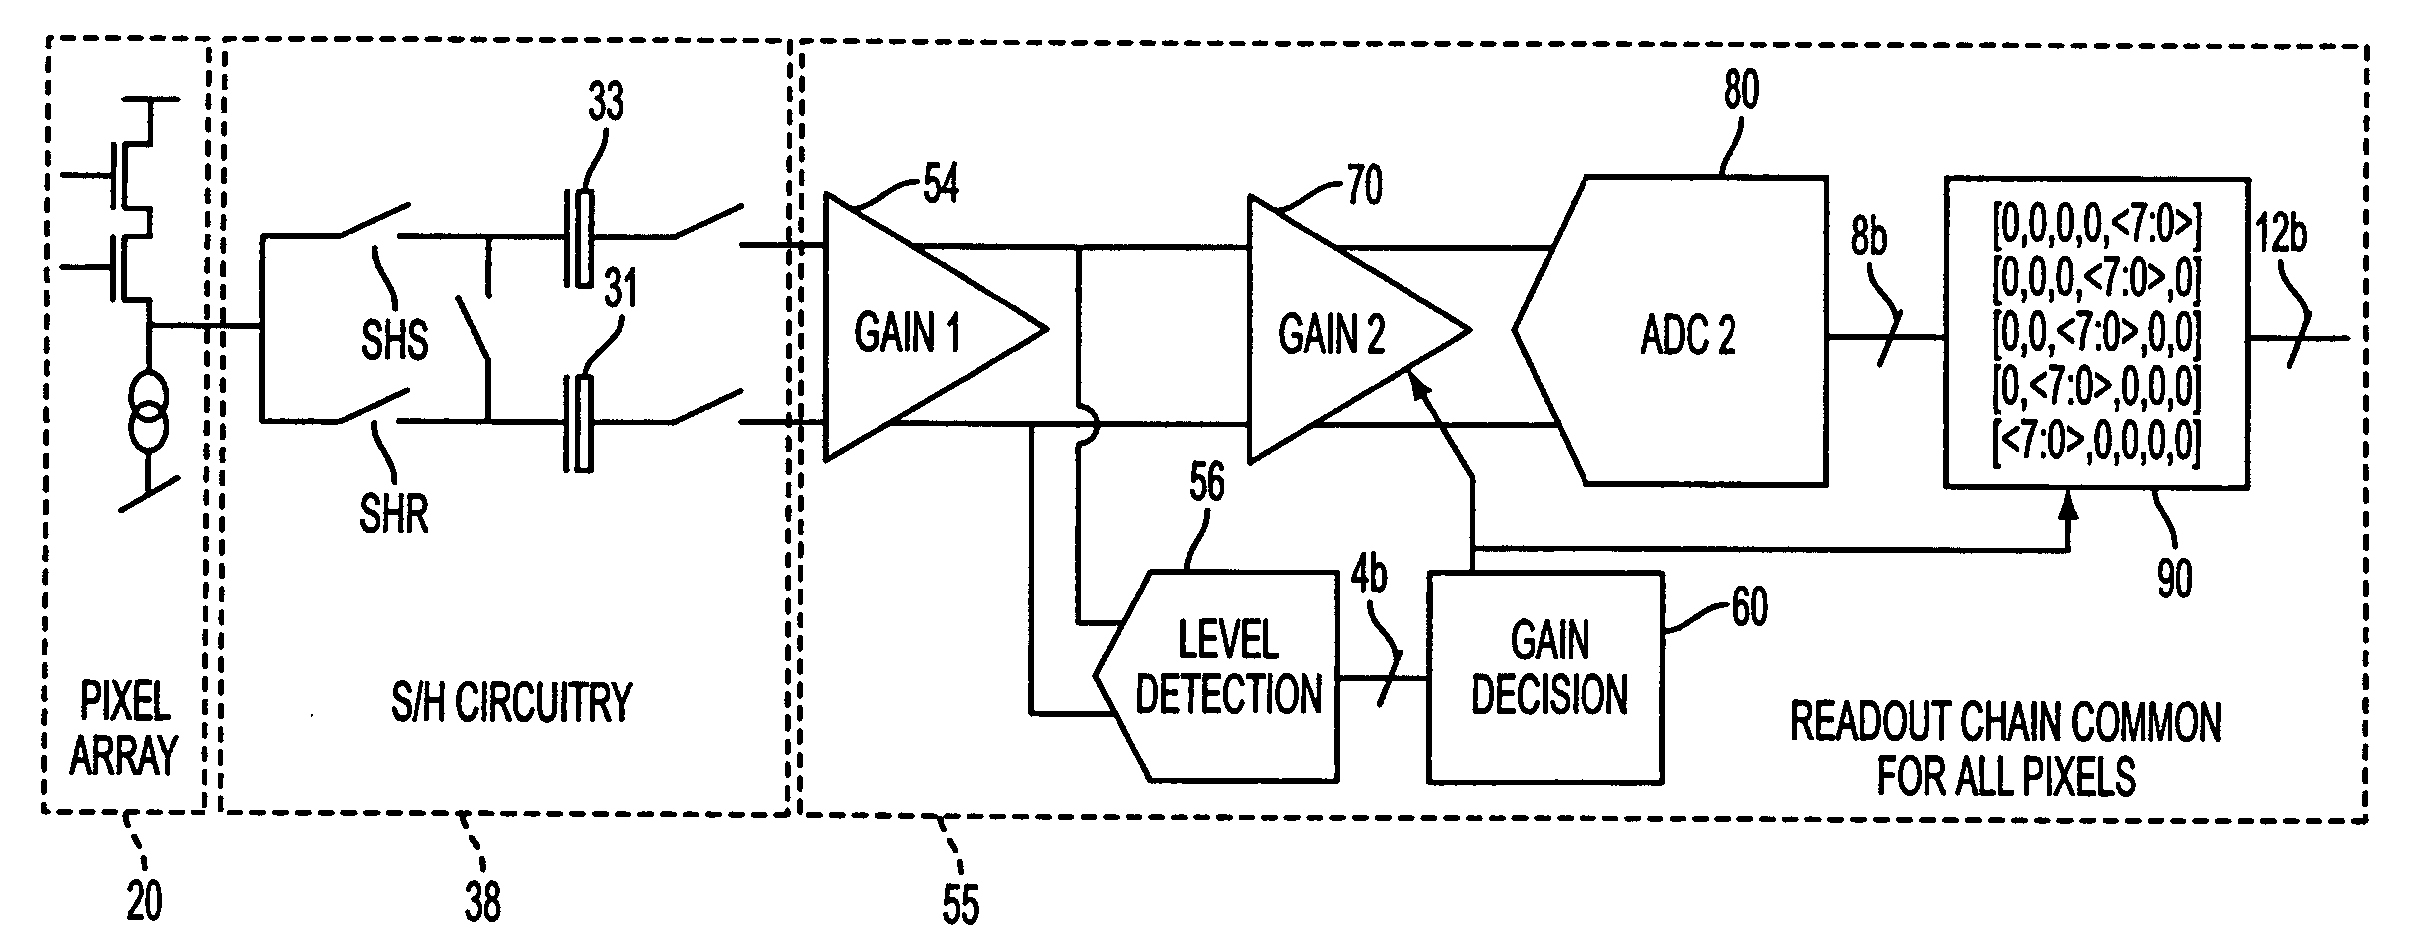 Readout technique for increasing or maintaining dynamic range in image sensors